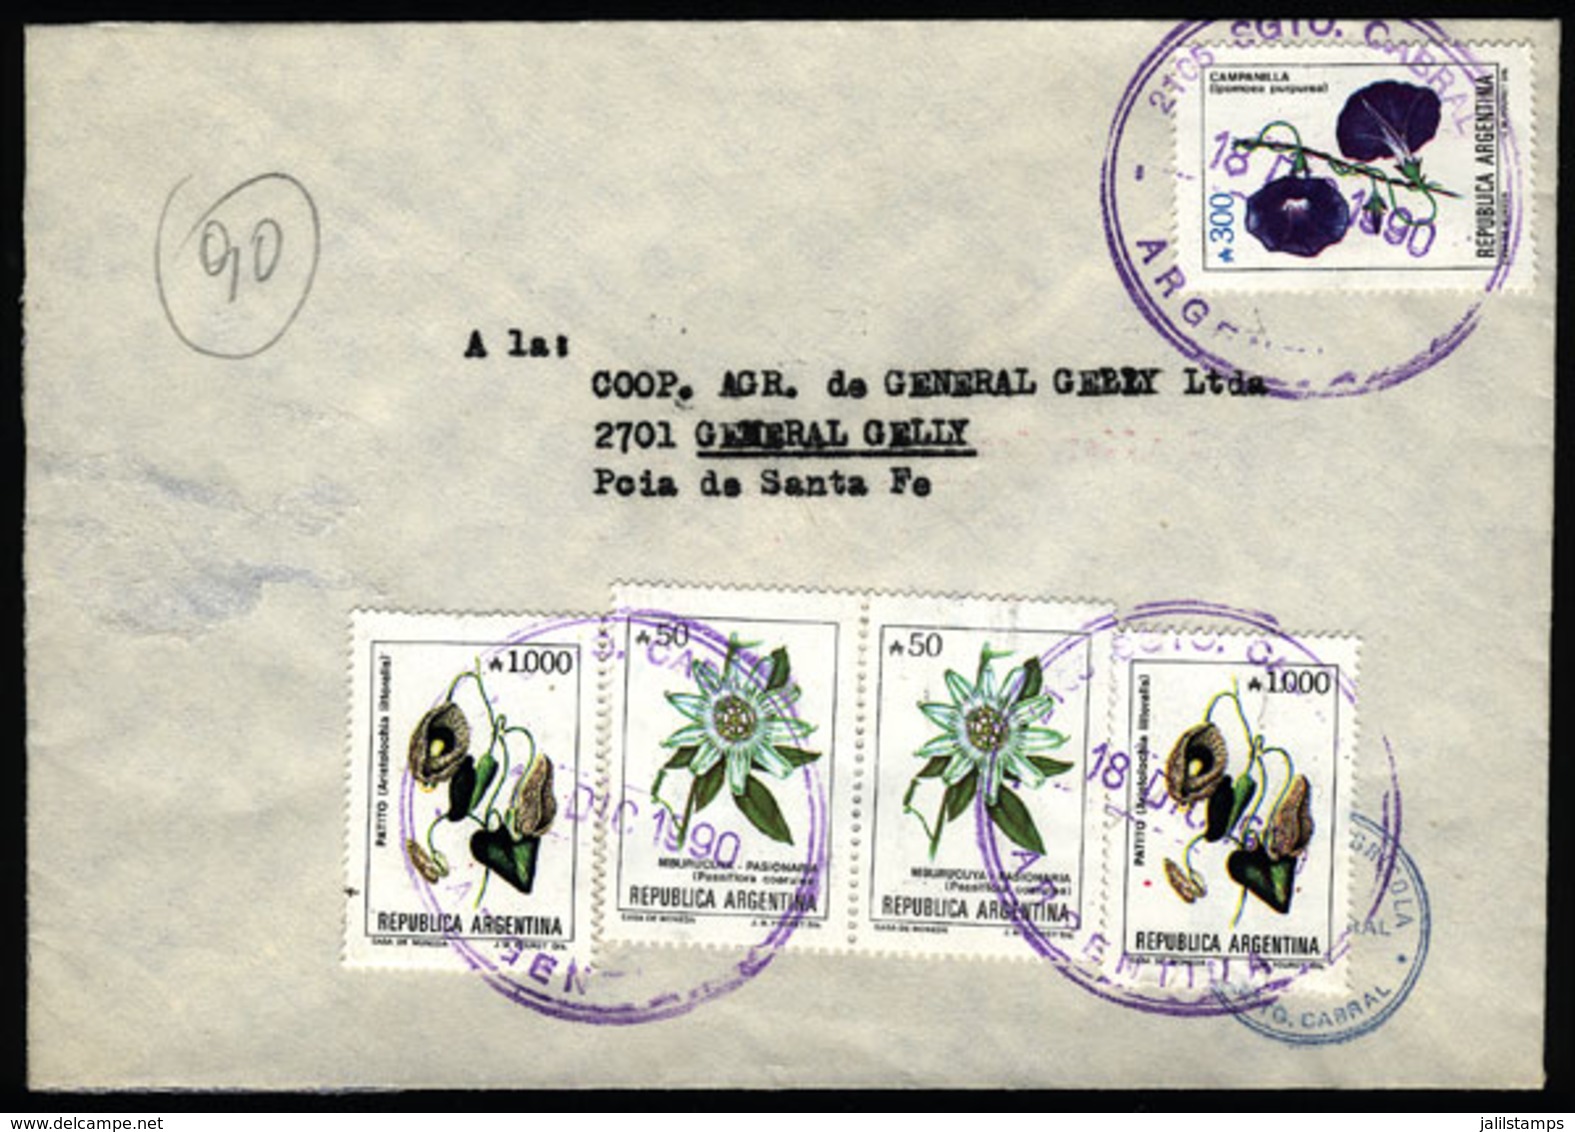 ARGENTINA: Cover Sent From "SGTO. CABRAL" (Santa Fe) To General Gelly (Santa Fe) On 18/DE/1990, With INFLA Postage Of A2 - Lettres & Documents